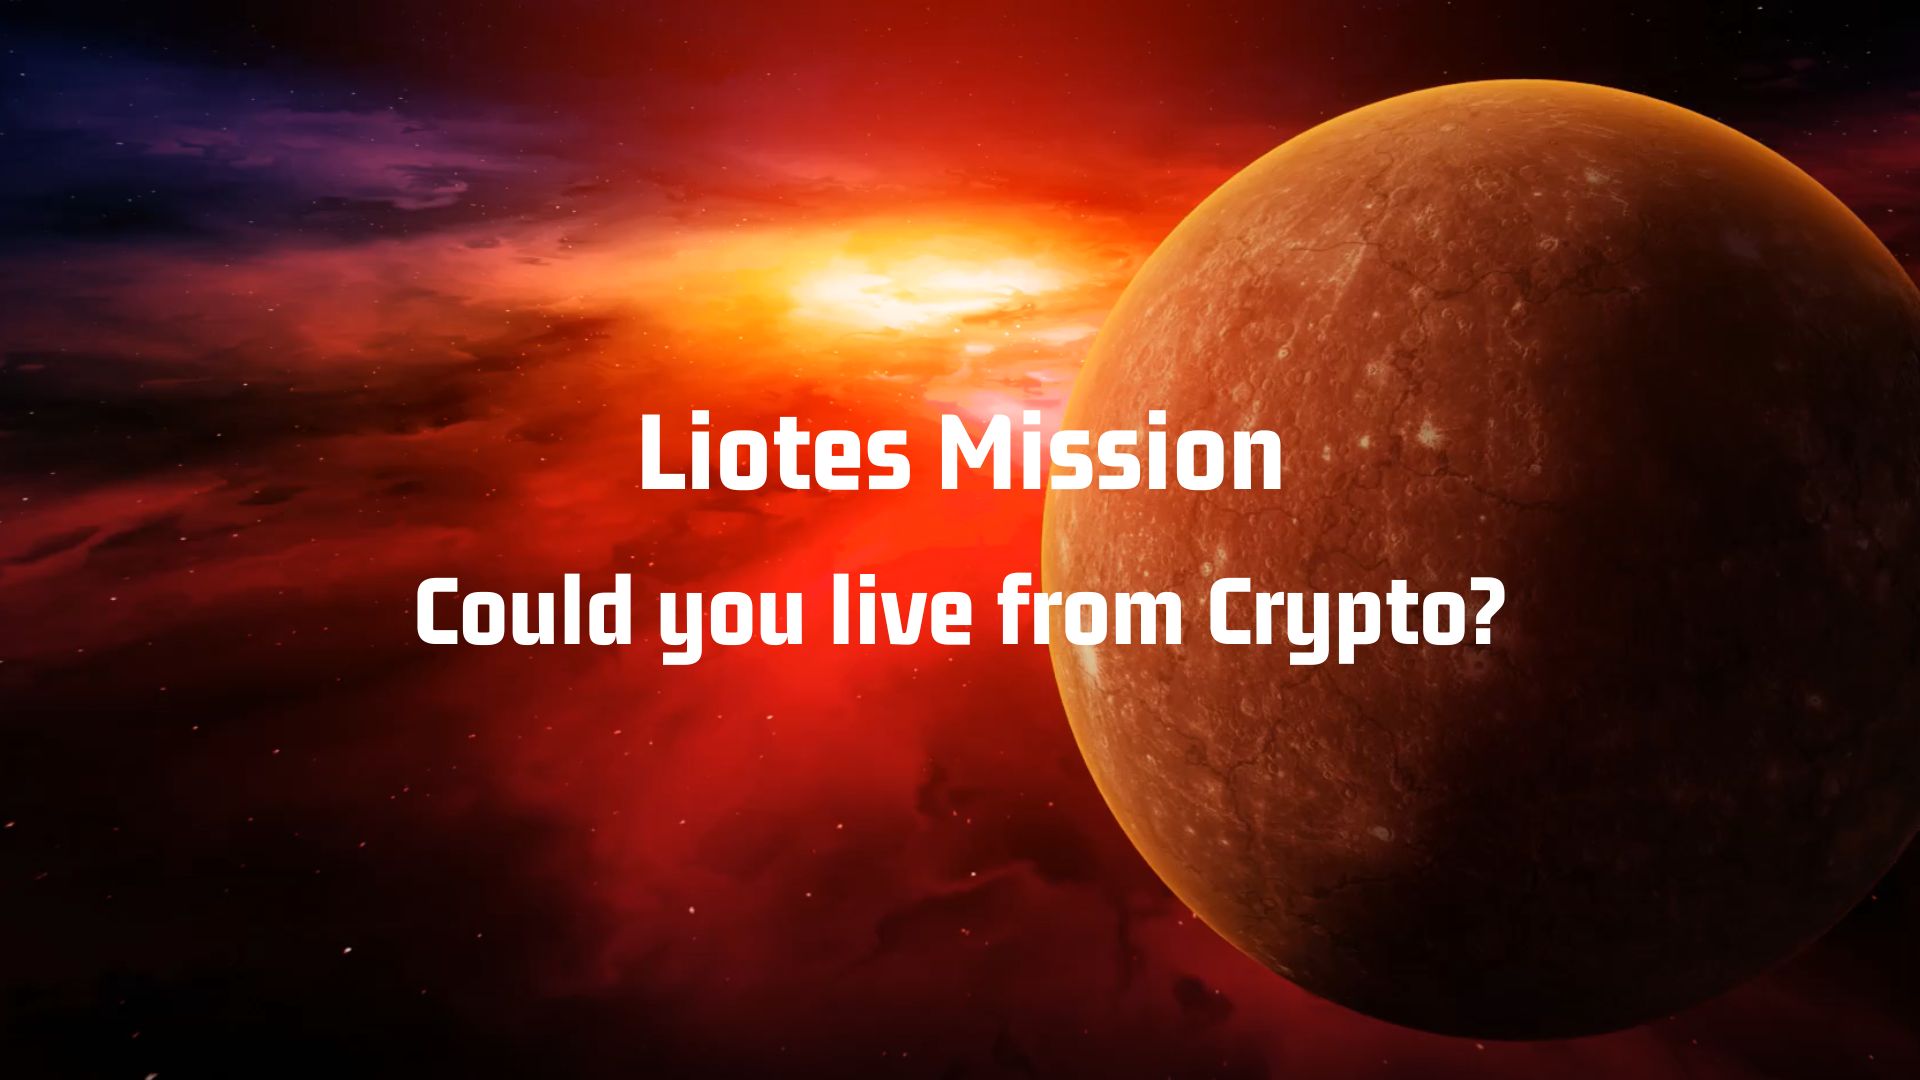 @liotes/could-you-live-from-crypto